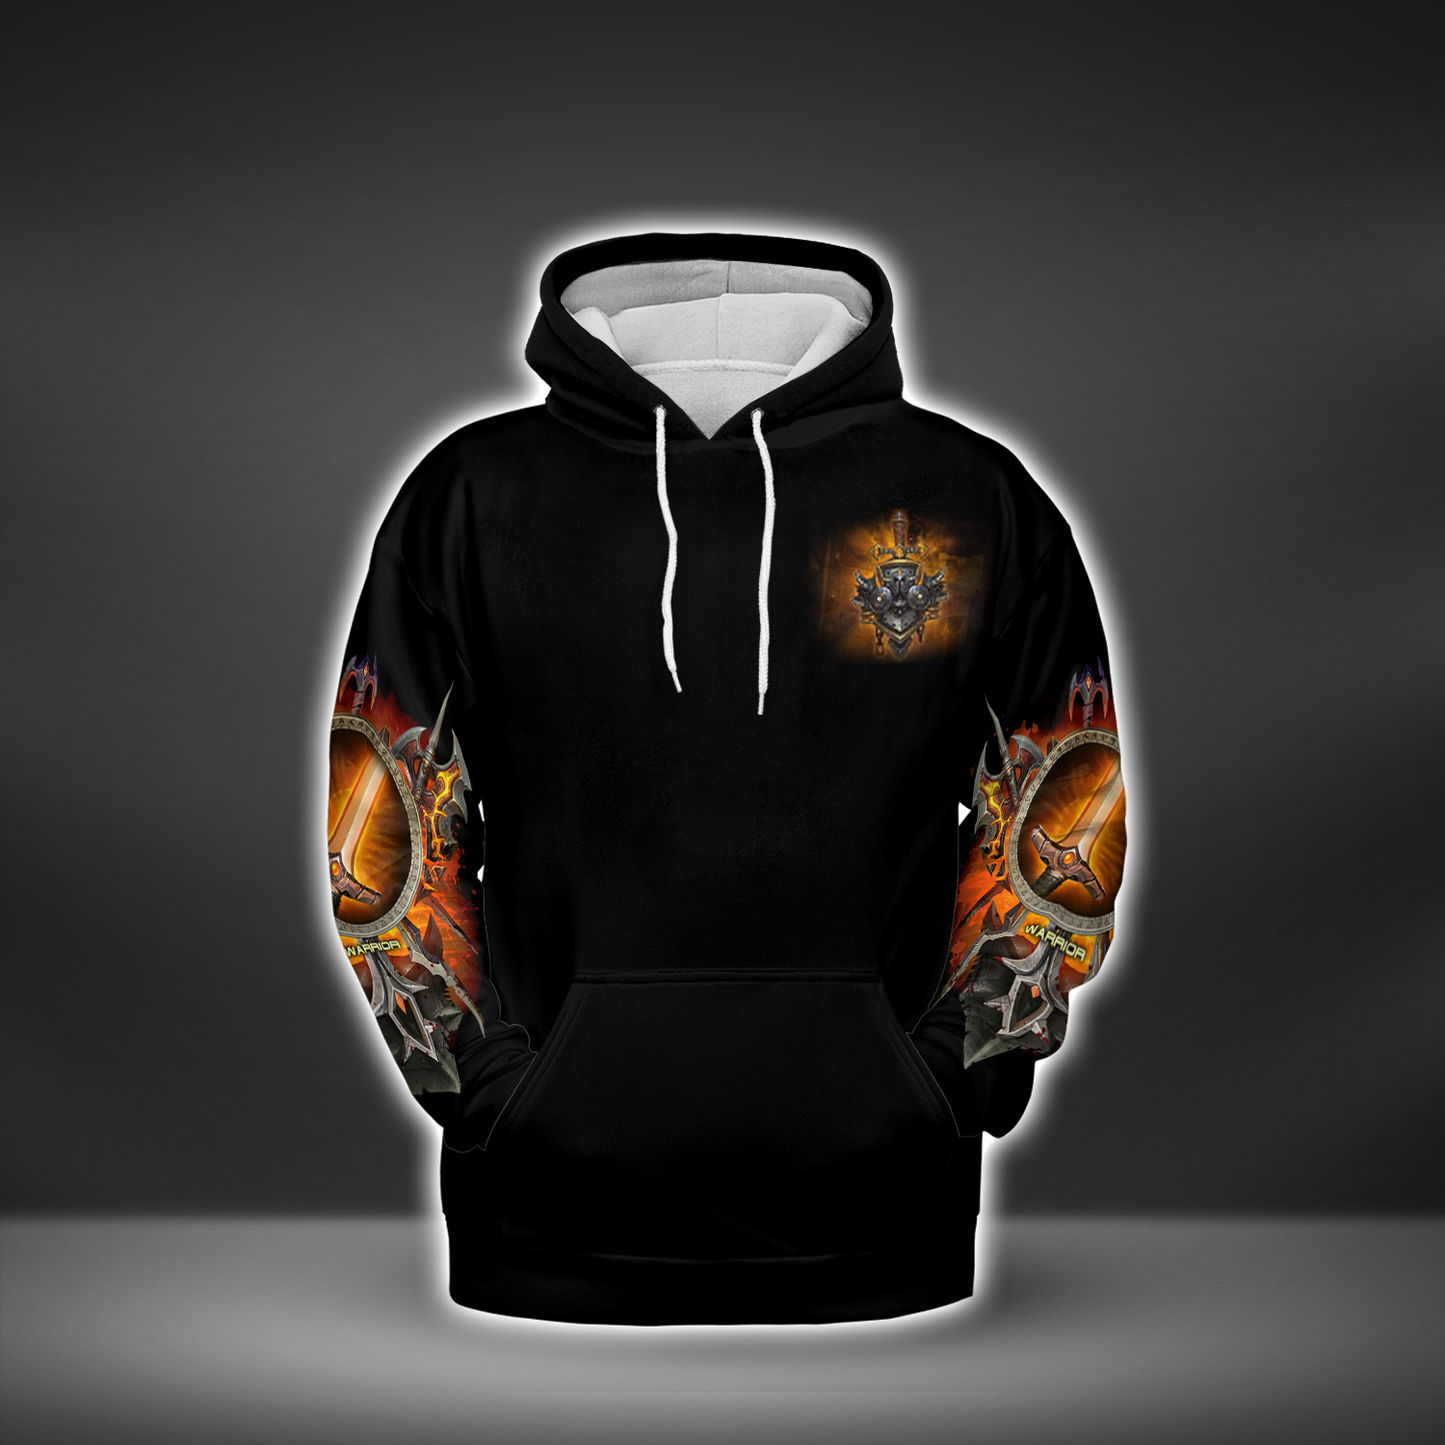 The Heart Of A Lion Warrior Wow AOP Hoodie Premium